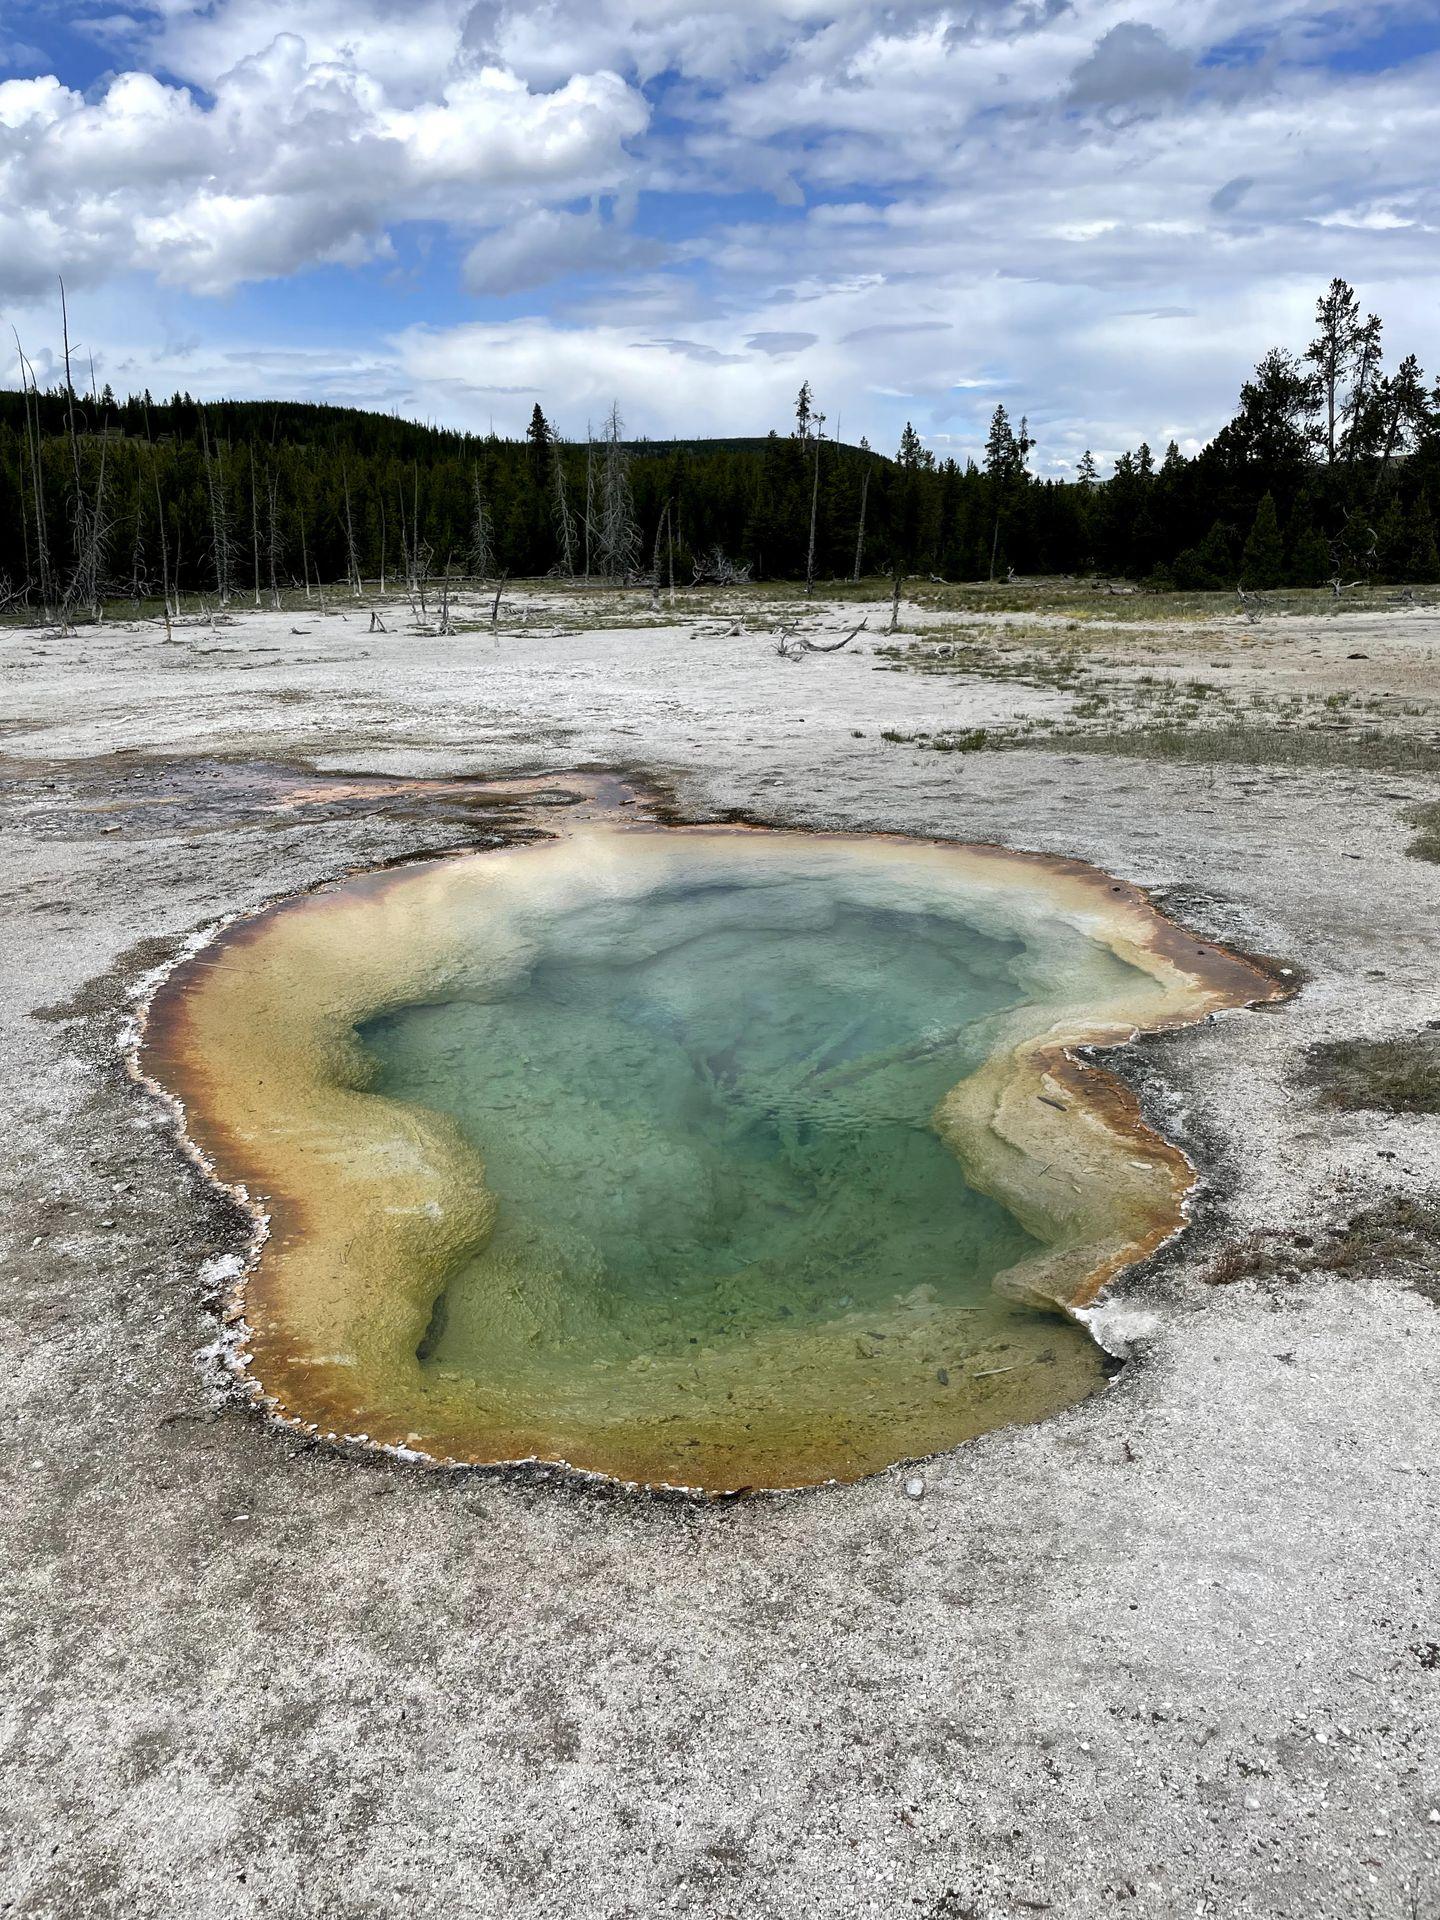 A green and yellow hot spring in the Biscuit Basin area of Yellowstone.